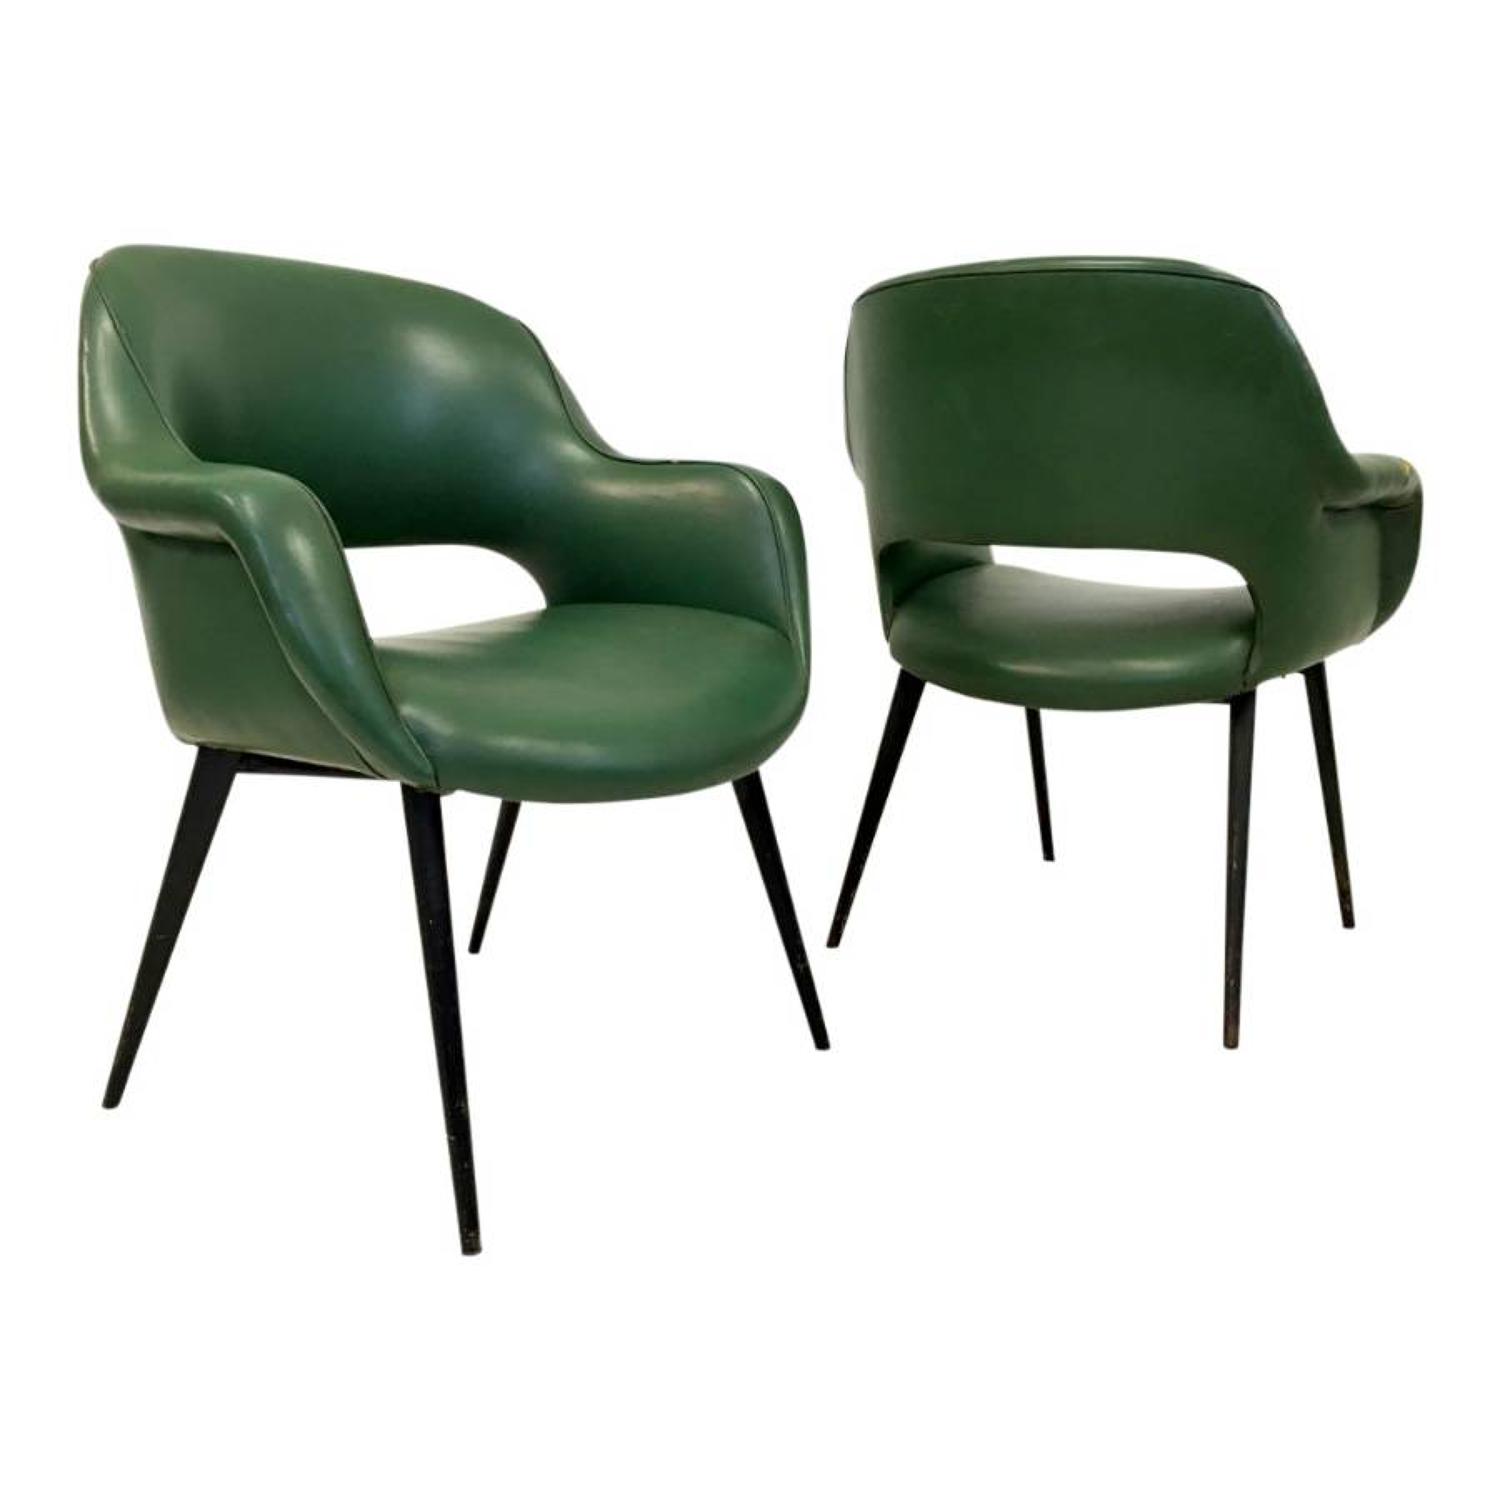 A pair of Italian armchairs with metal legs